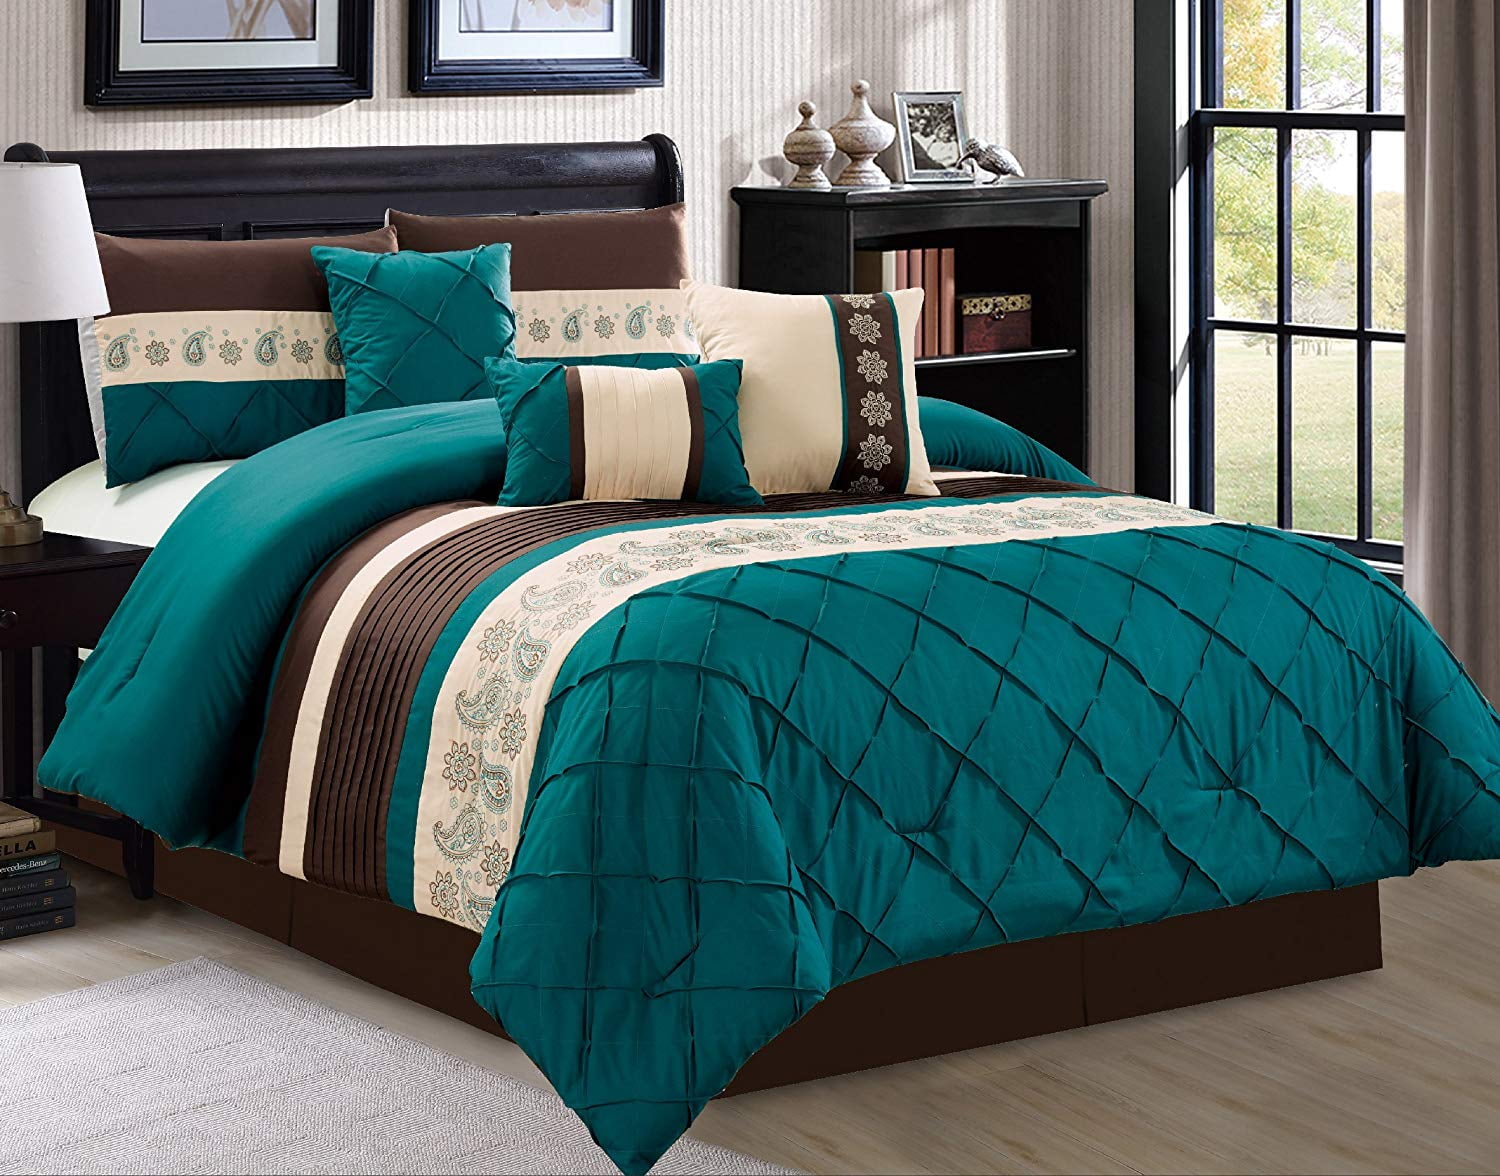 Details about   7 Pcs Luxury Cal King Bedding Comforter Sets Breathable Oversized Bedroom Teal 